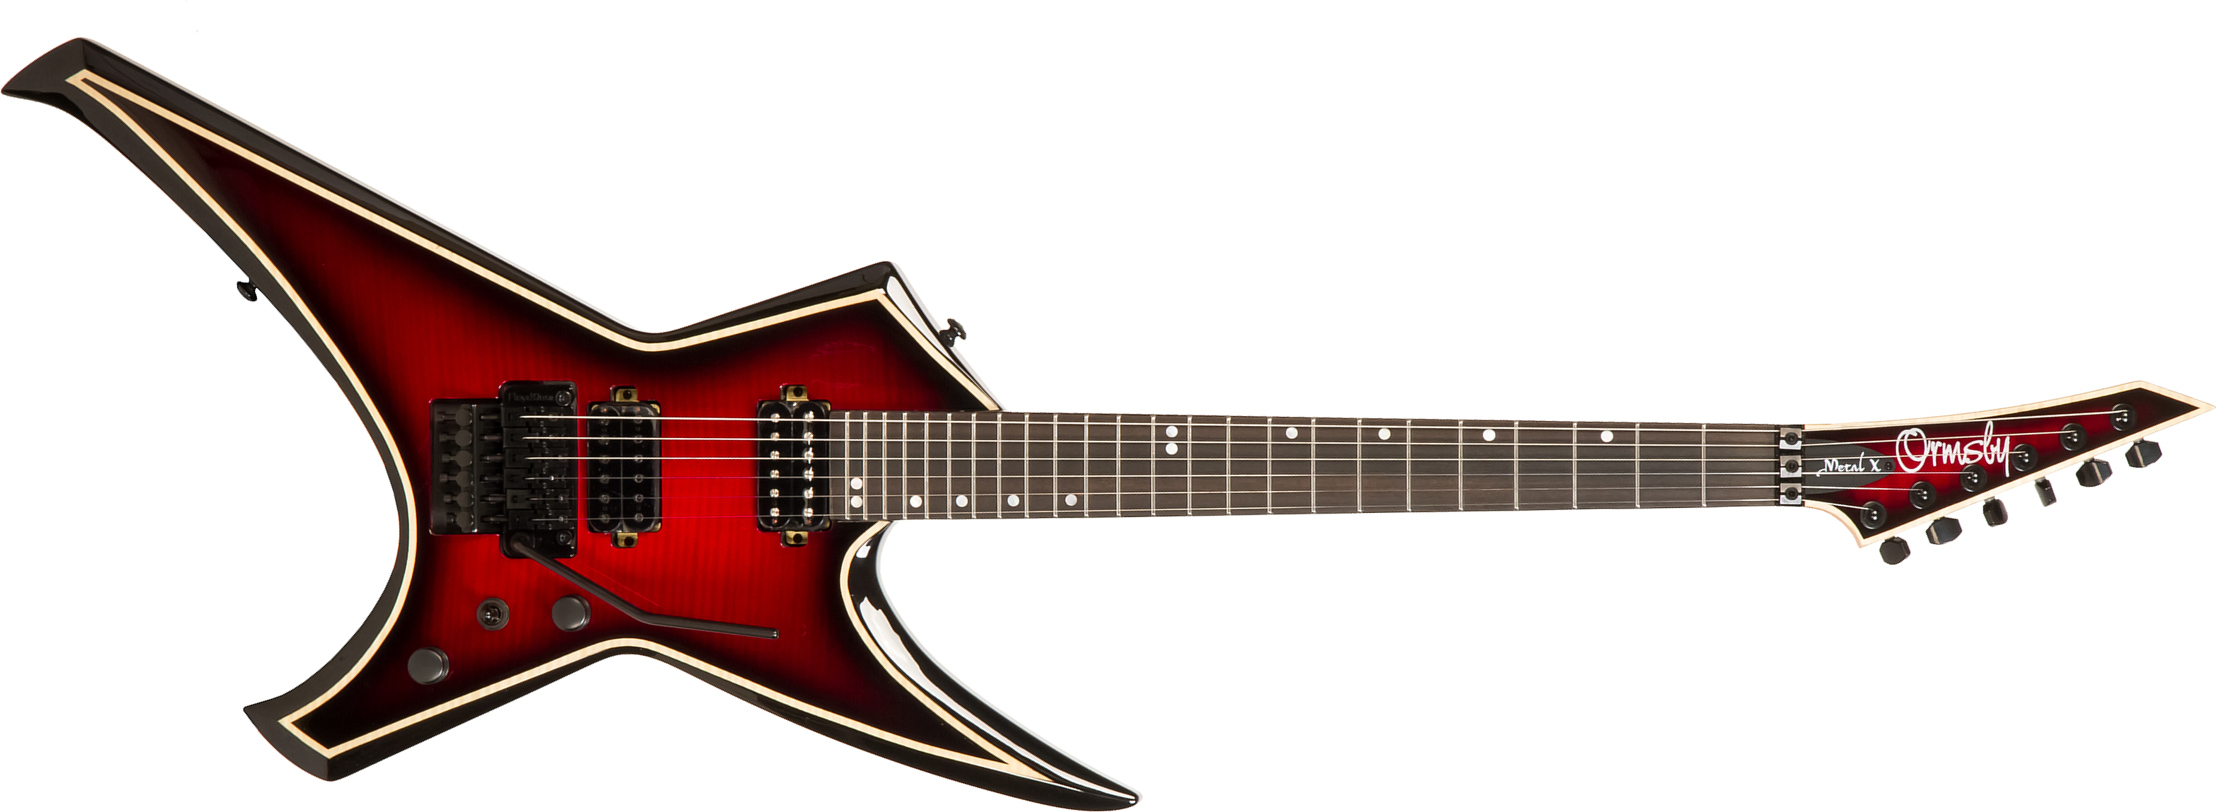 Ormsby Metal X 6 Hh Fr Eb - Red Dead - Metal electric guitar - Main picture